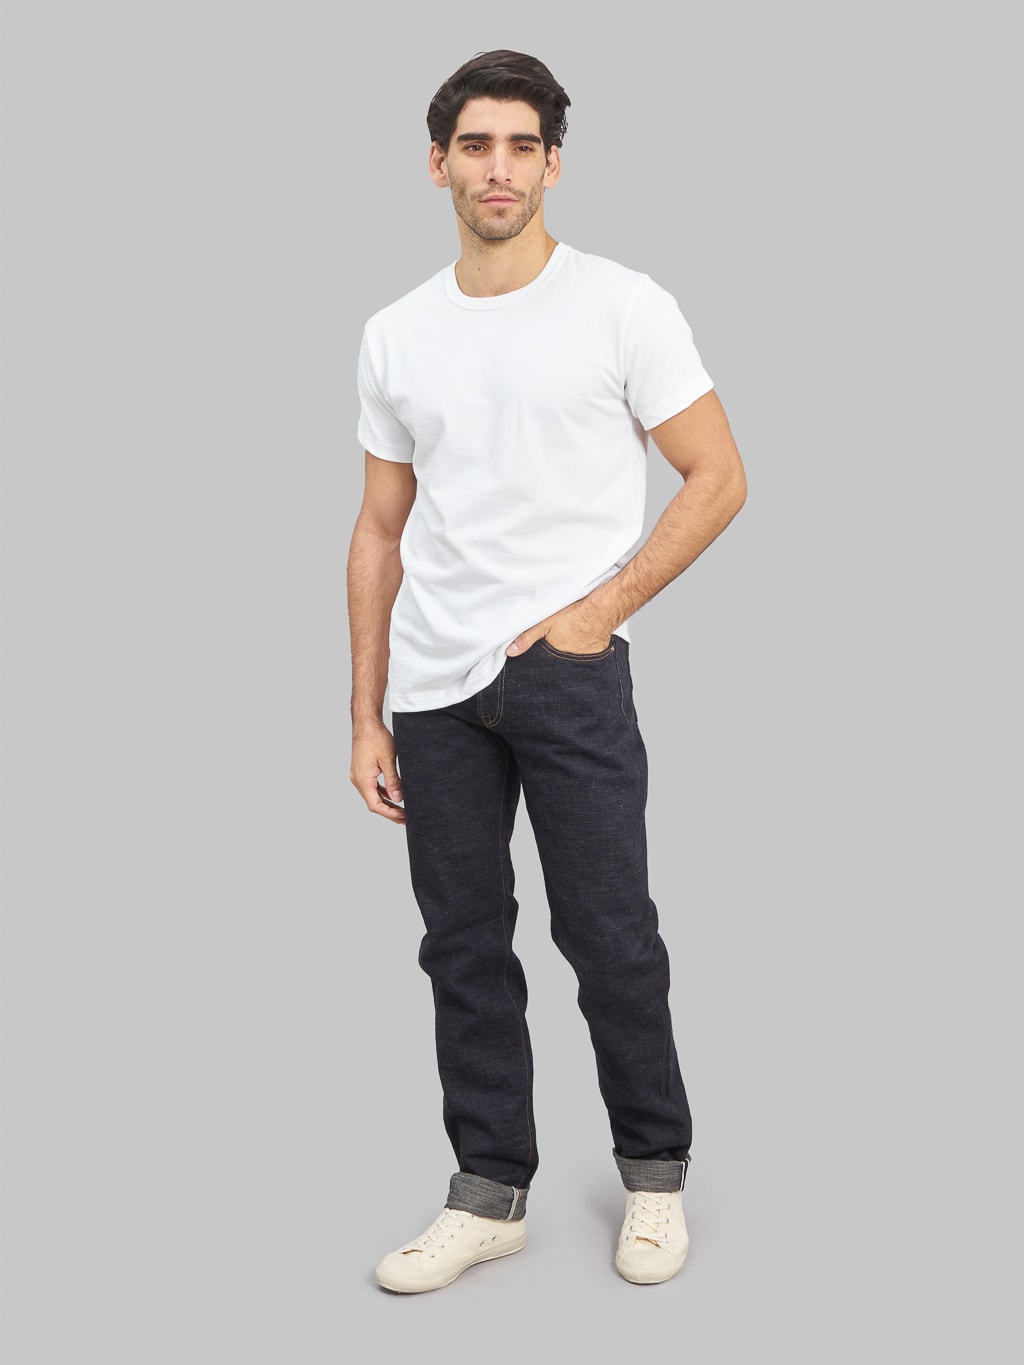 The Strike Gold 5104 Slub Grey Weft Straight Tapered Jeans style